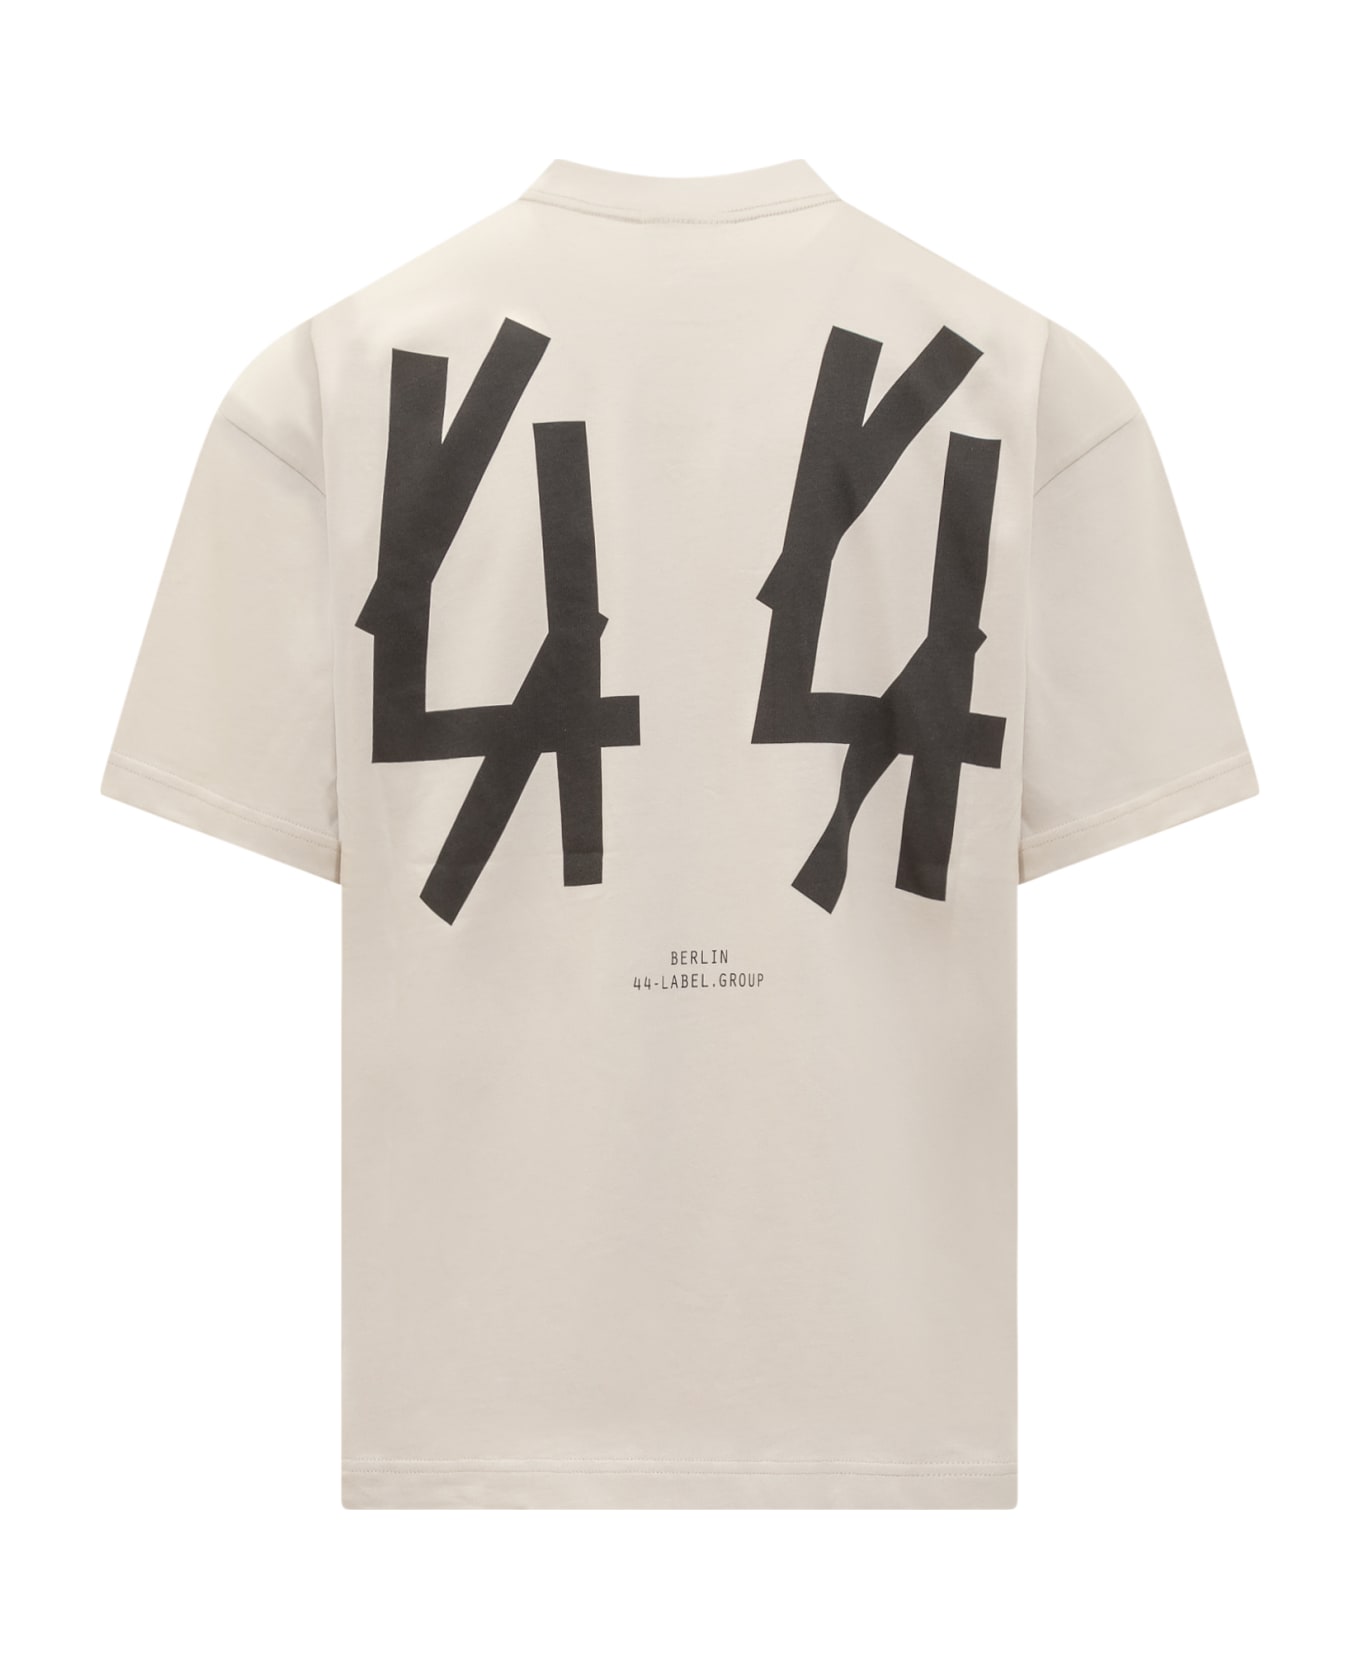 44 Label Group T-shirt With Logo T-Shirt - DIRTY WHITE シャツ